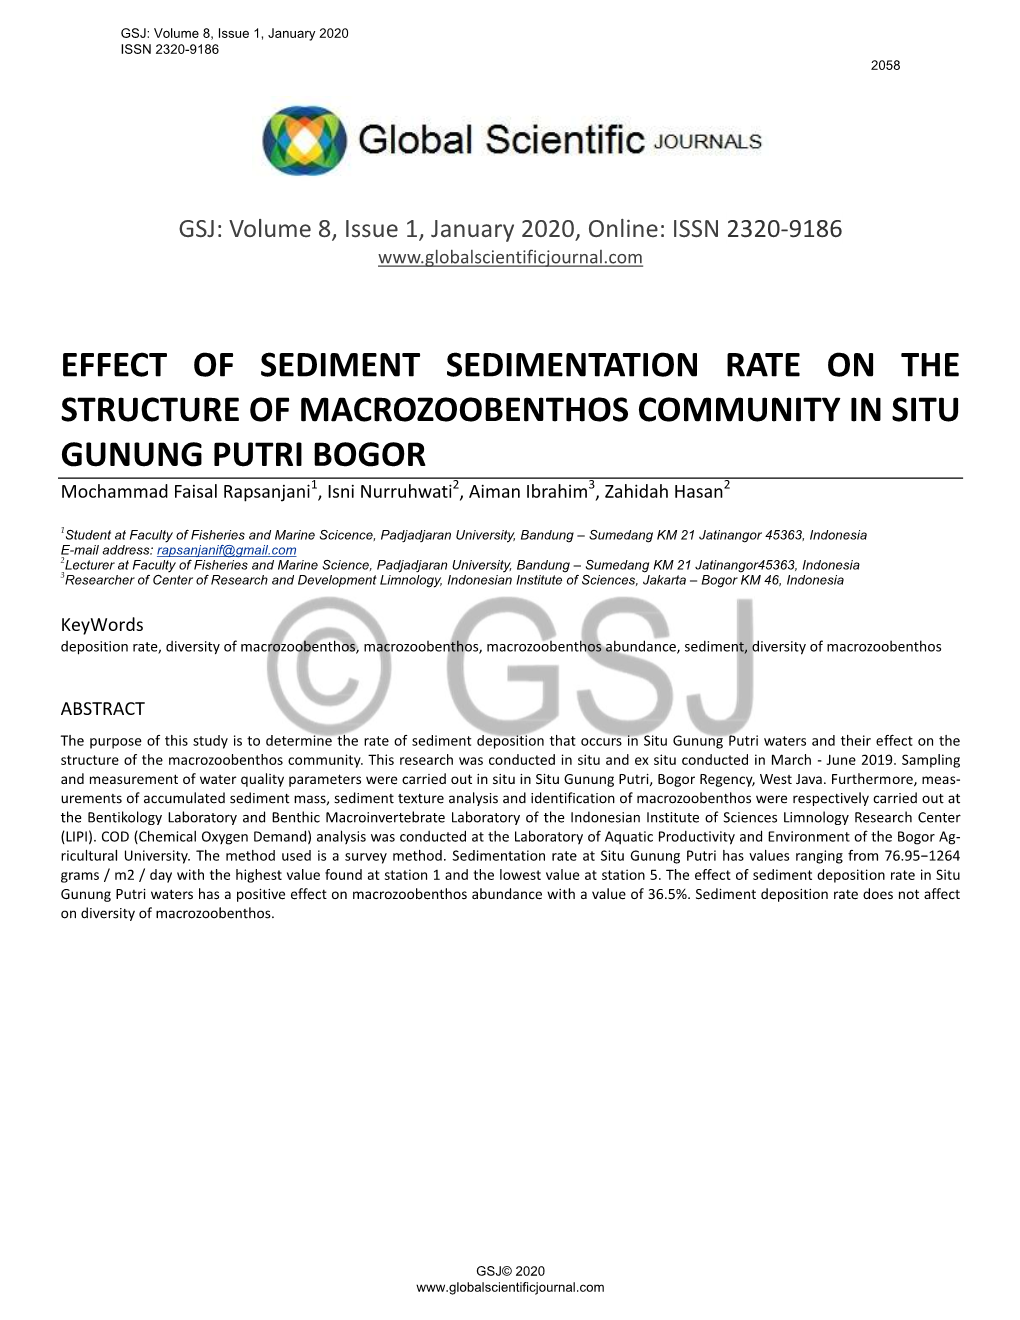 Effect of Sediment Sedimentation Rate on The